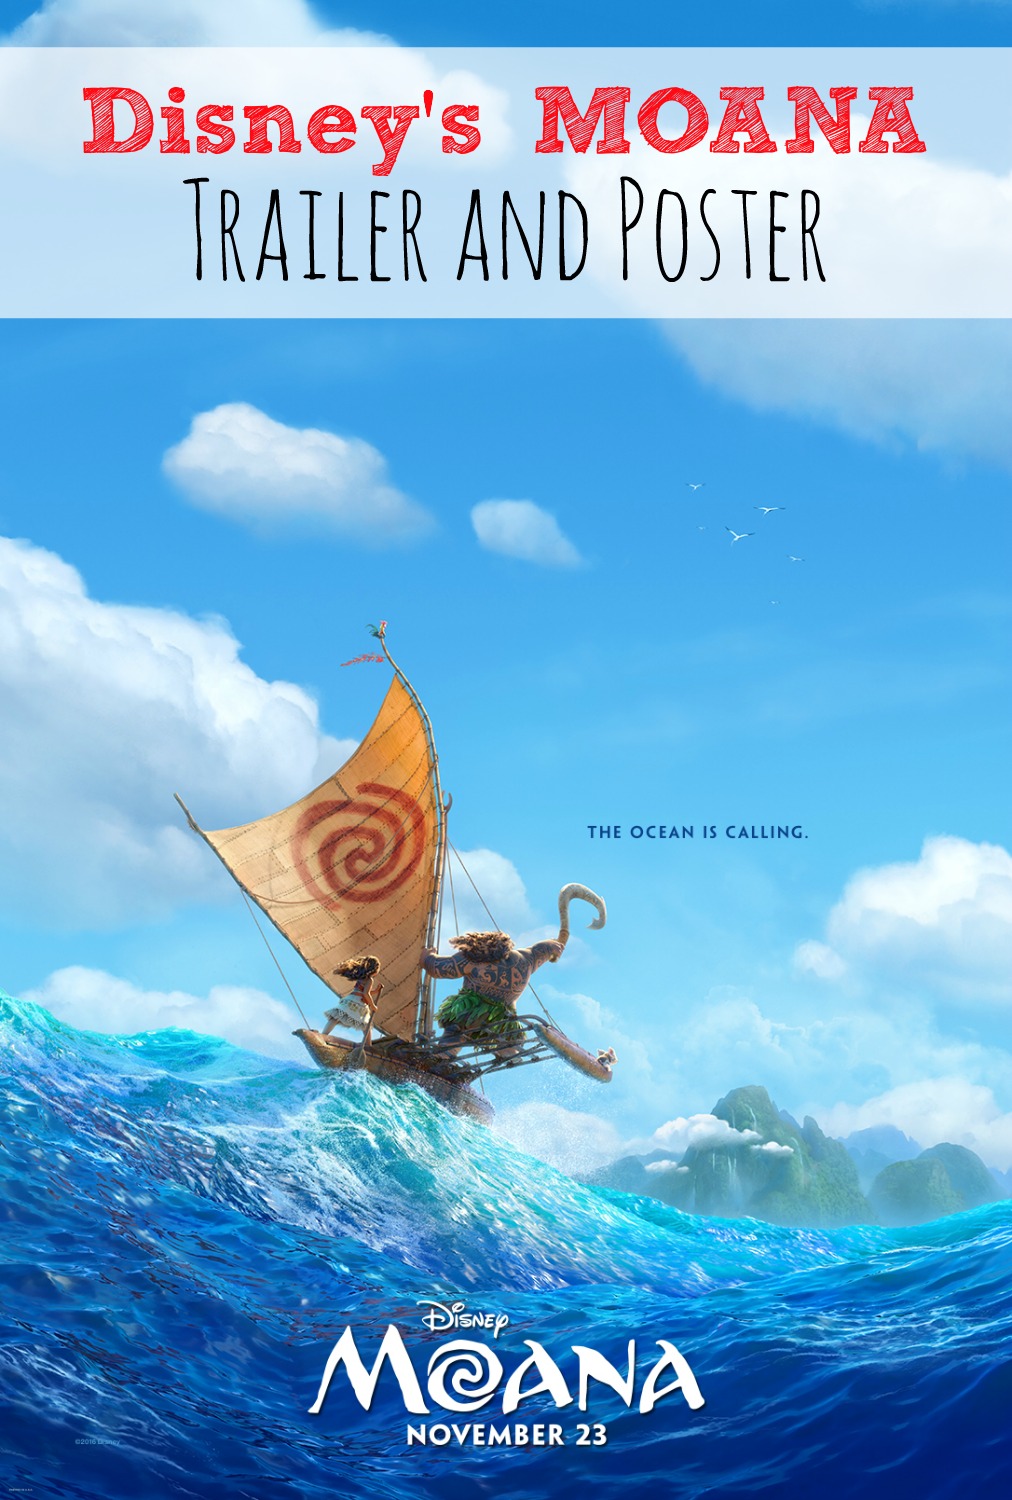 Disney's MOANA Trailer and Poster